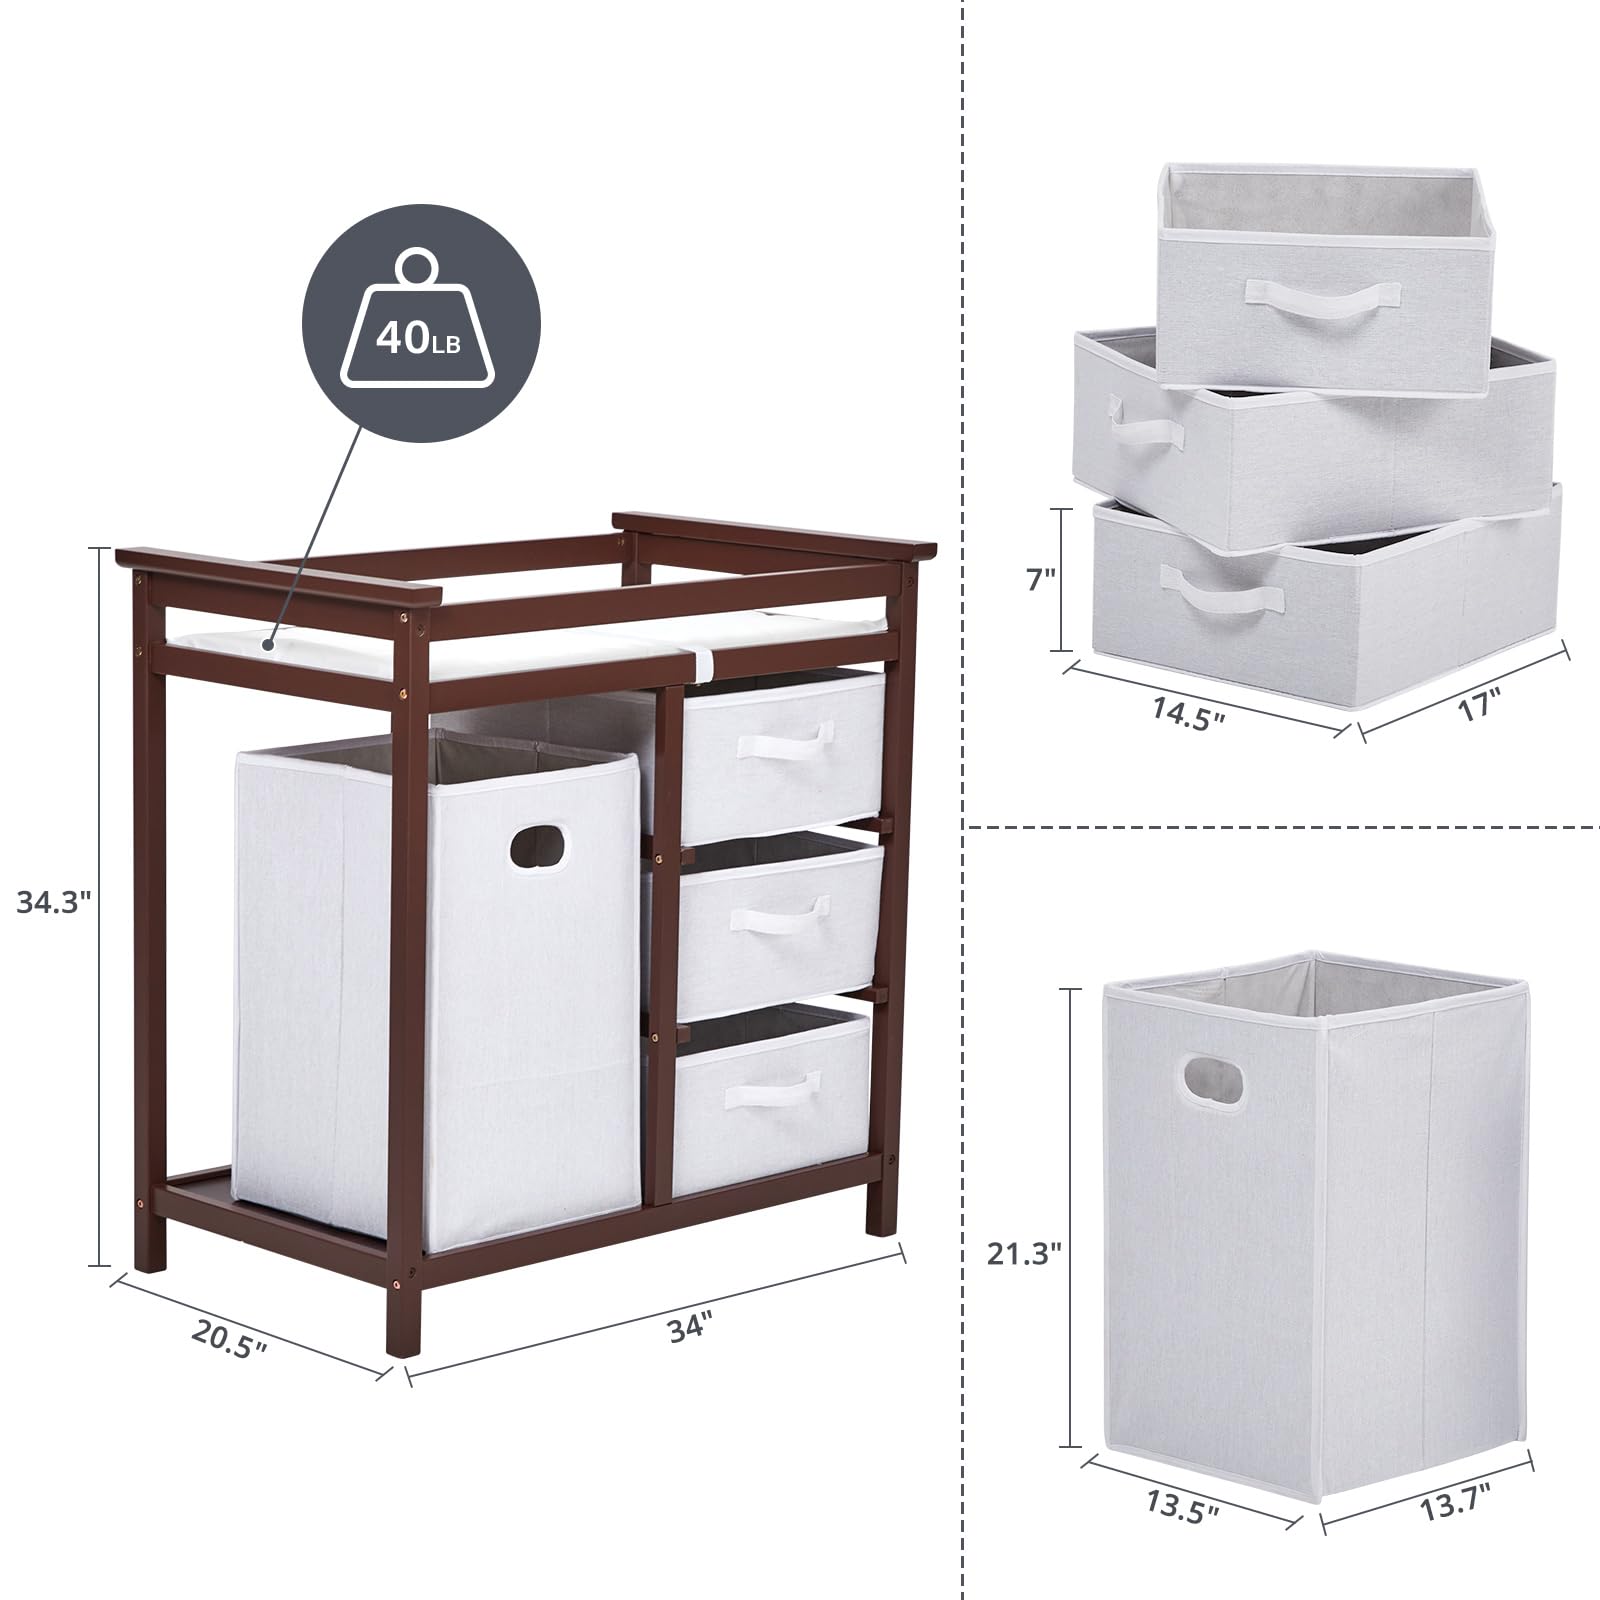 Baby Changing Table, Wooden Diaper Changing Table, Infant Diaper Changing Station Dresser with Laundry Hamper, 3 Drawer Basket and Changing Pad (Brown)